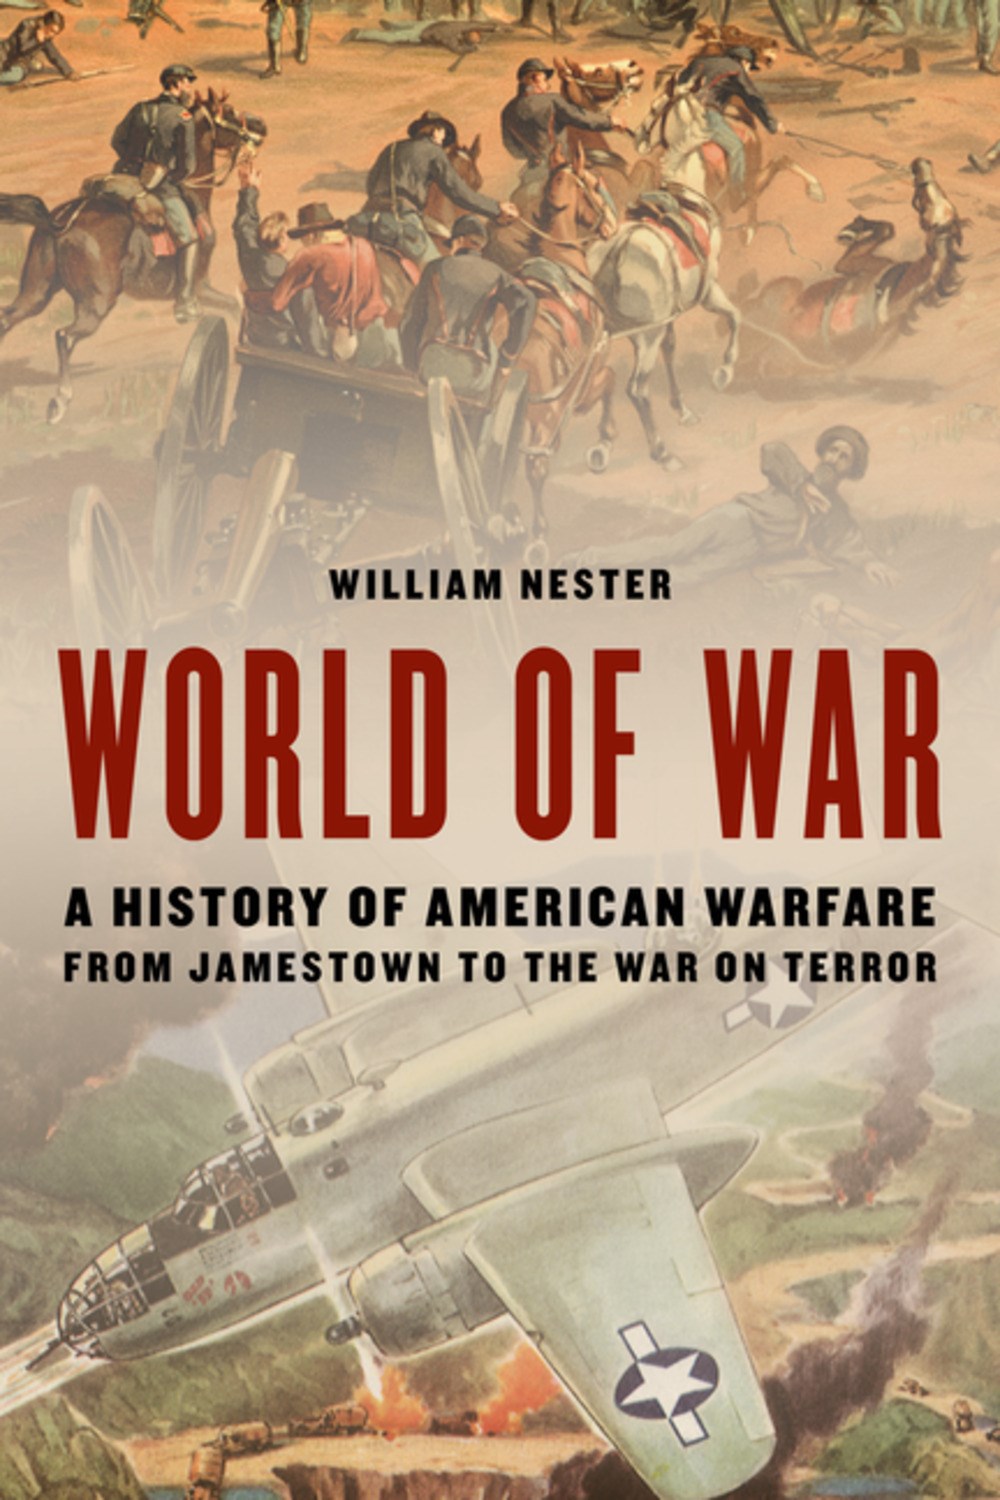 World of War: A History of American Warfare from Jamestown to the War on Terror